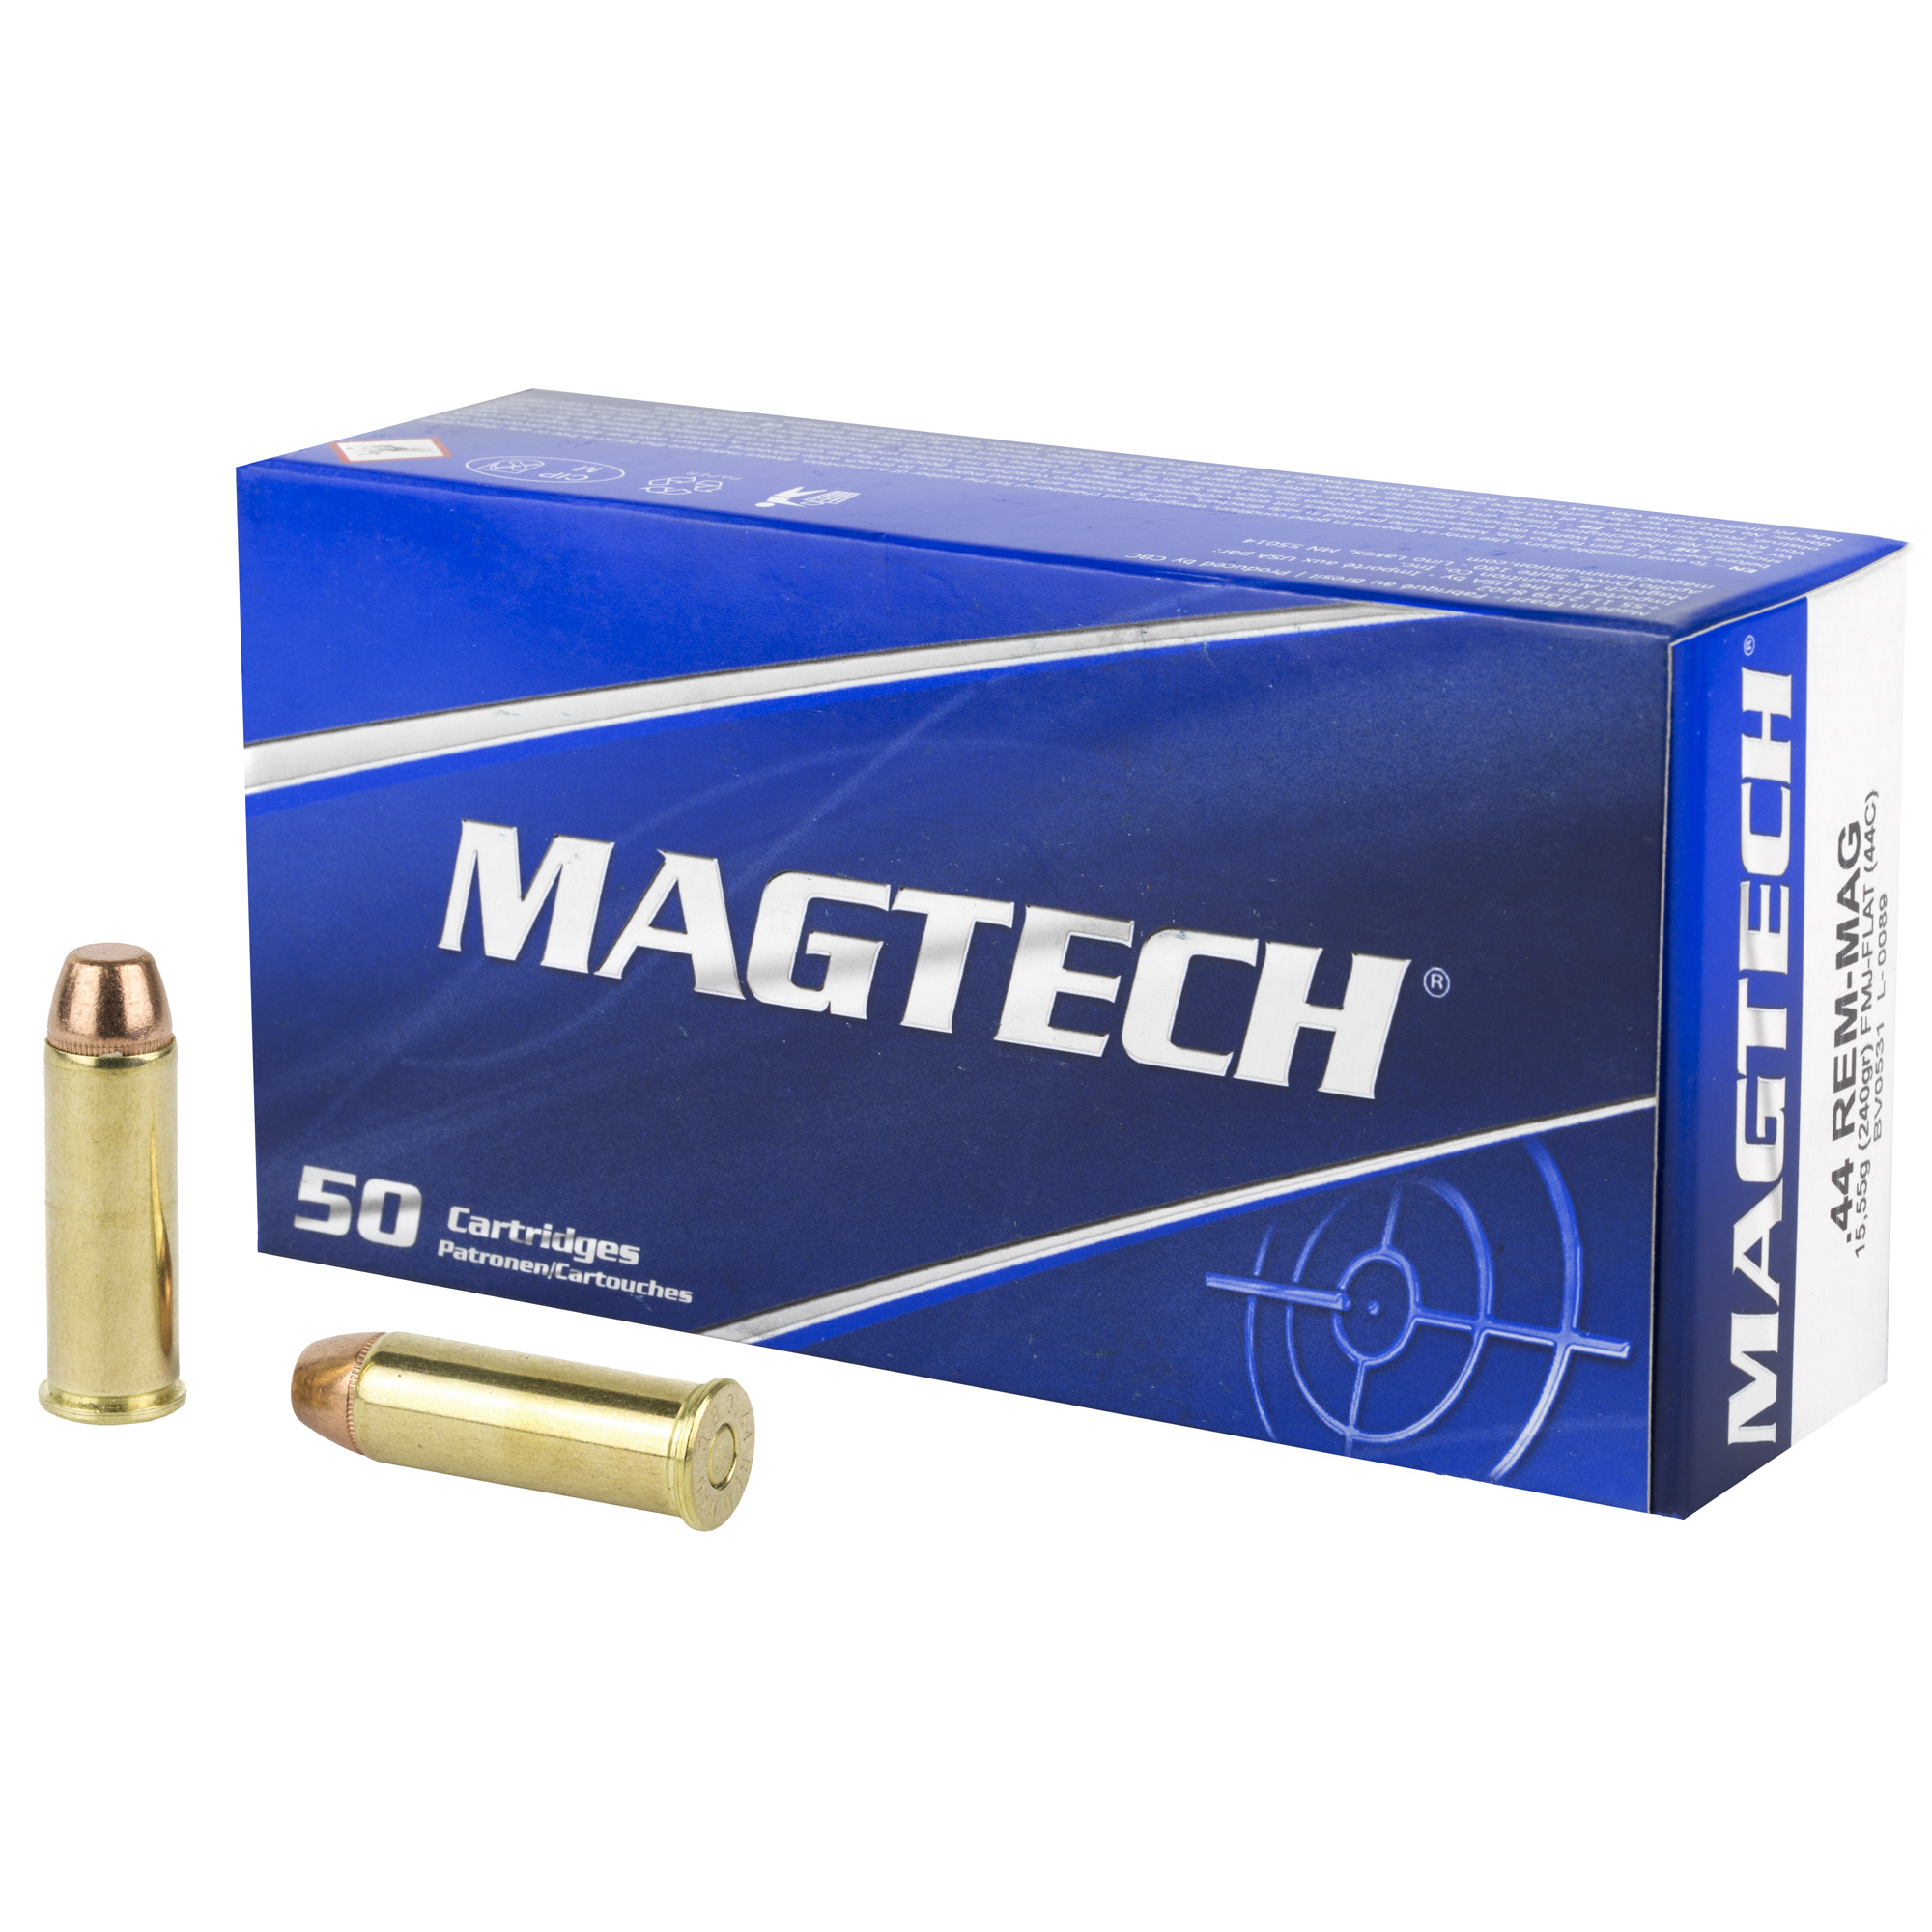 Magtech, Sport Shooting, 44MAG, 240 Grain FMJ, Flat Nose, Full Metal Case, 50 Round Boxes,.Case Pack 20-Boxes (1000Rds.), 44C,